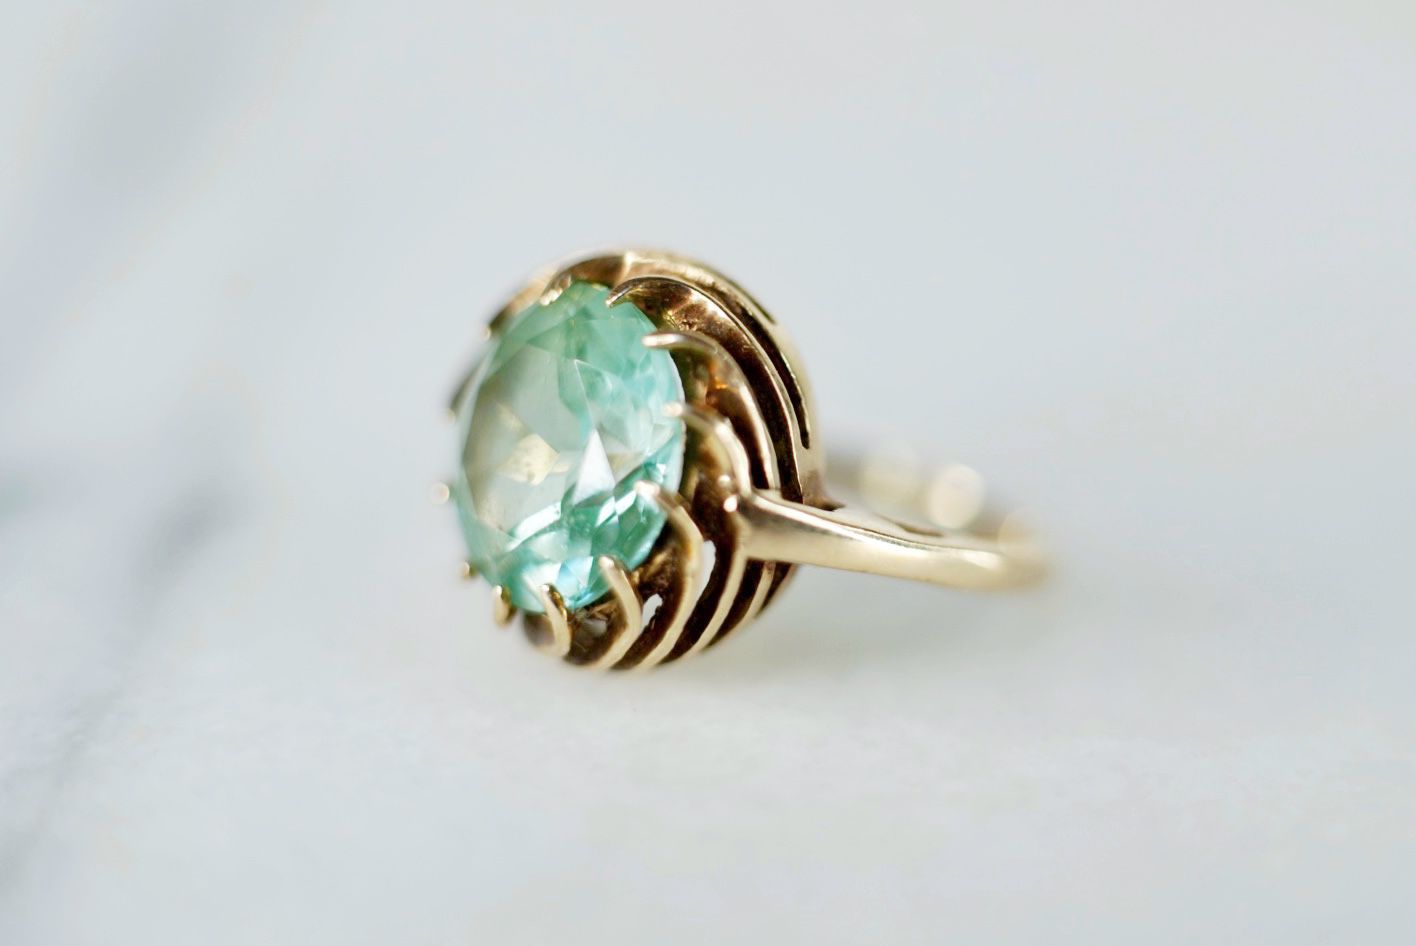  Vintage Engagement Ring 10k Gold Blue Zirconium (Open To Trades)